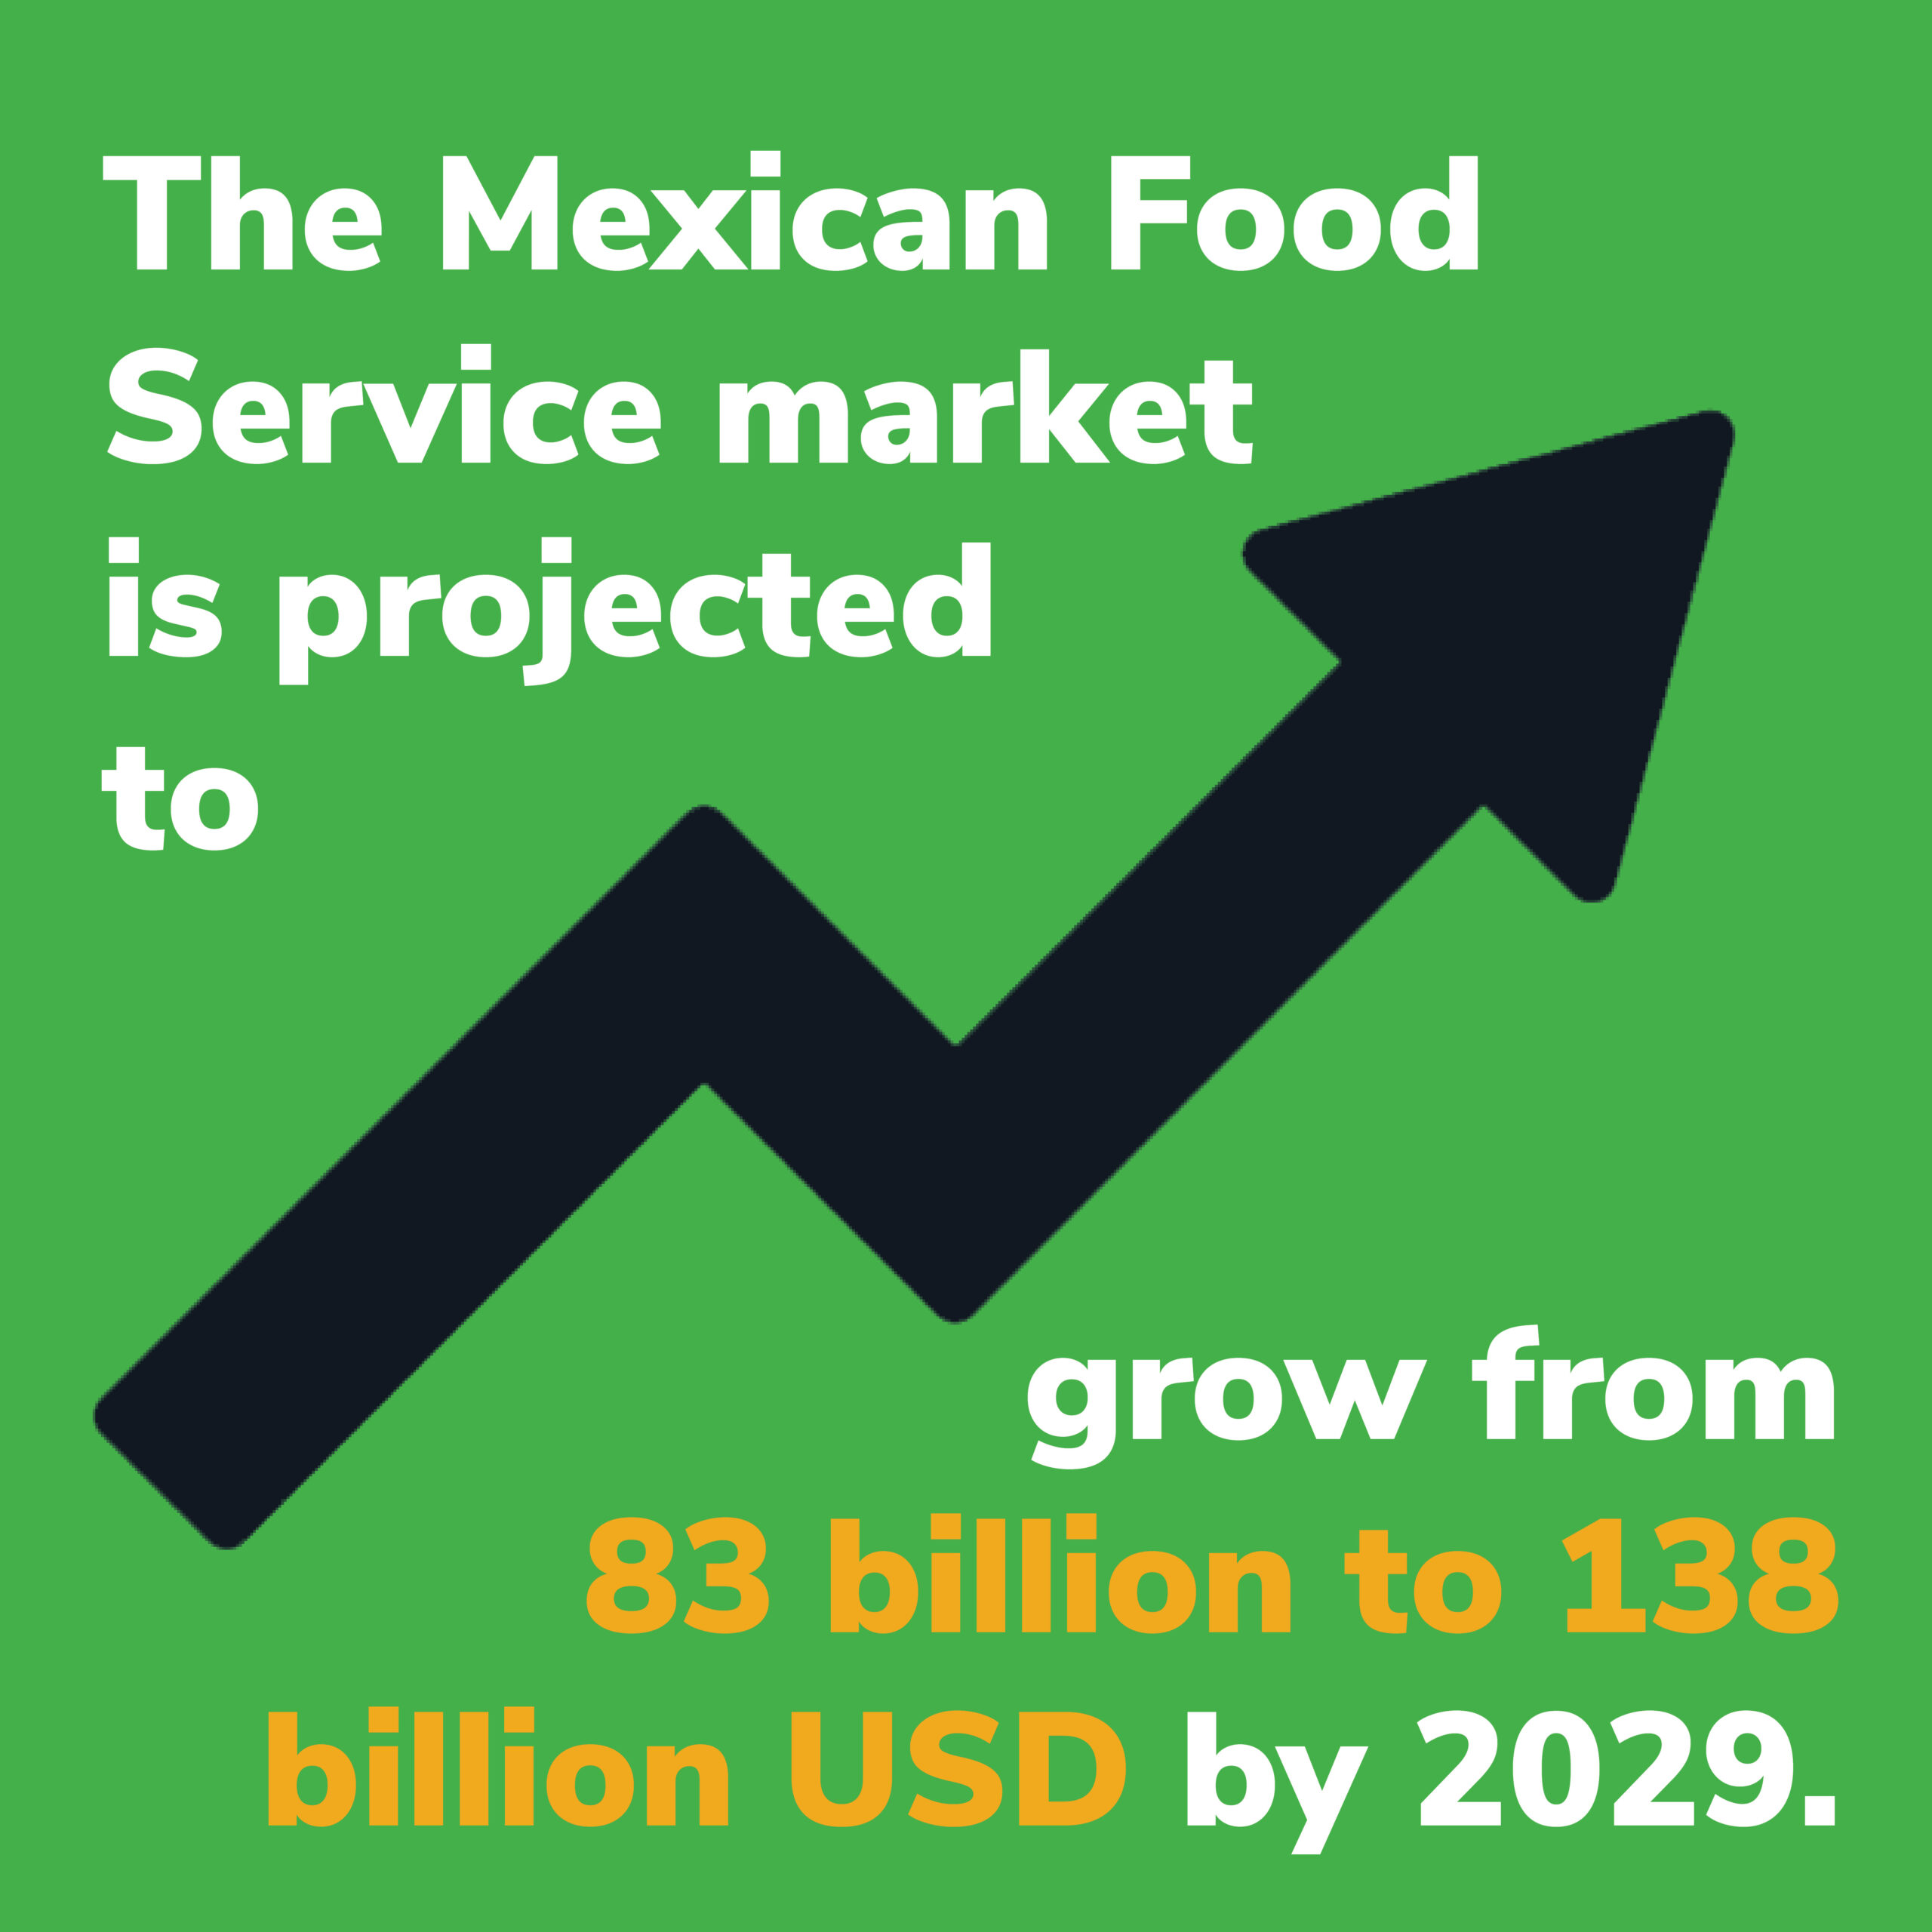 Kagome USA, Mexican Sauce Category, Trend Data, Mexican Food Service